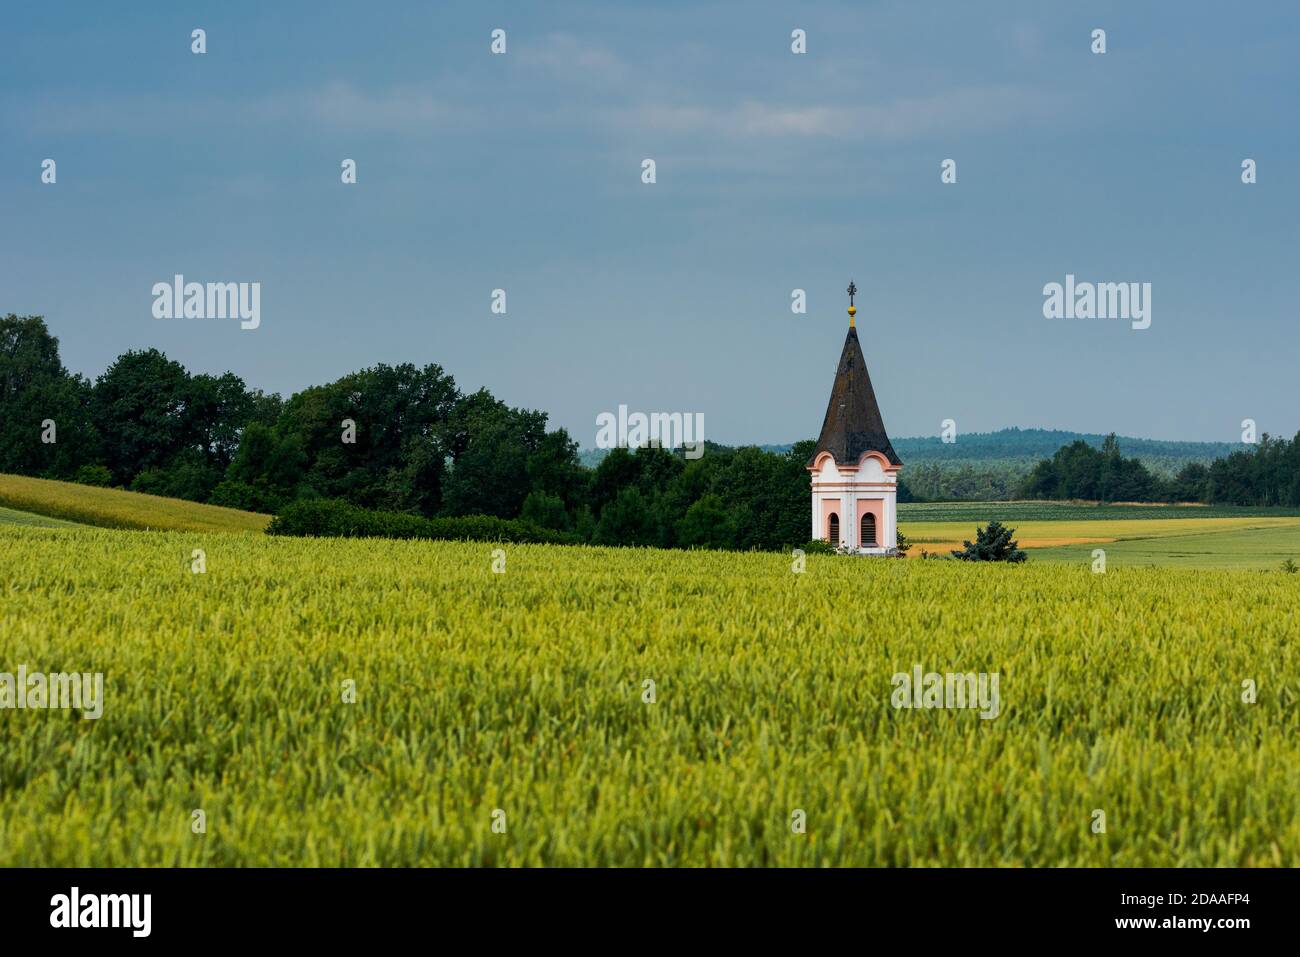 Typical lower bavarian church bell tower hidden behind hill with field of growing wheat against blue sky Stock Photo